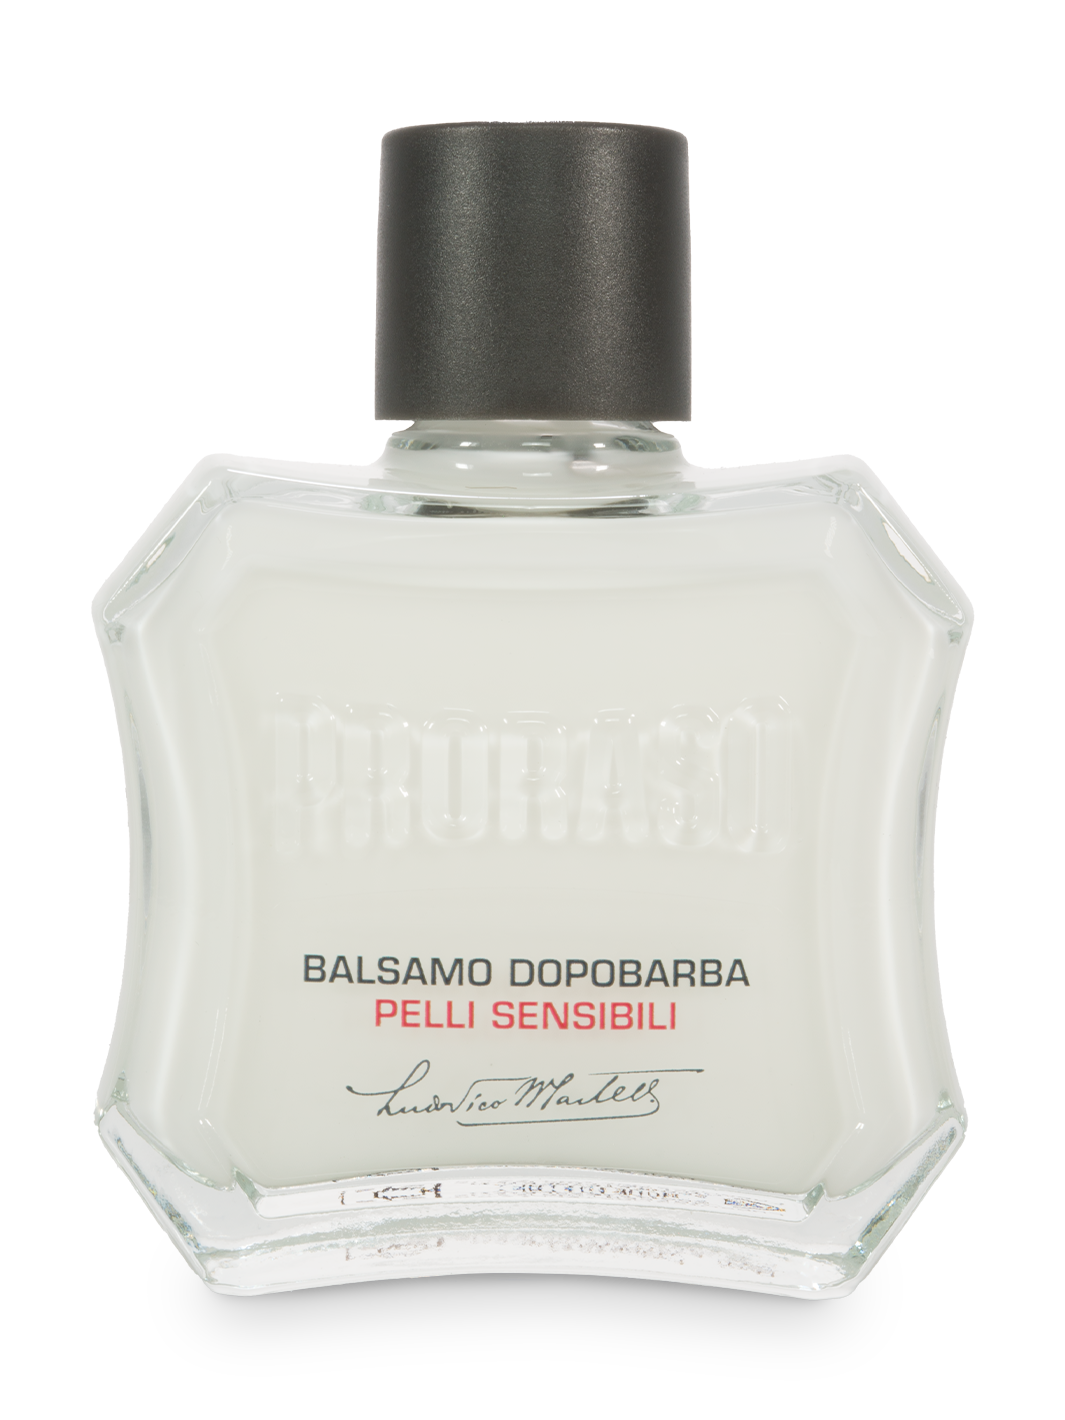 Proraso After Shave Balm Sensitive 100ml